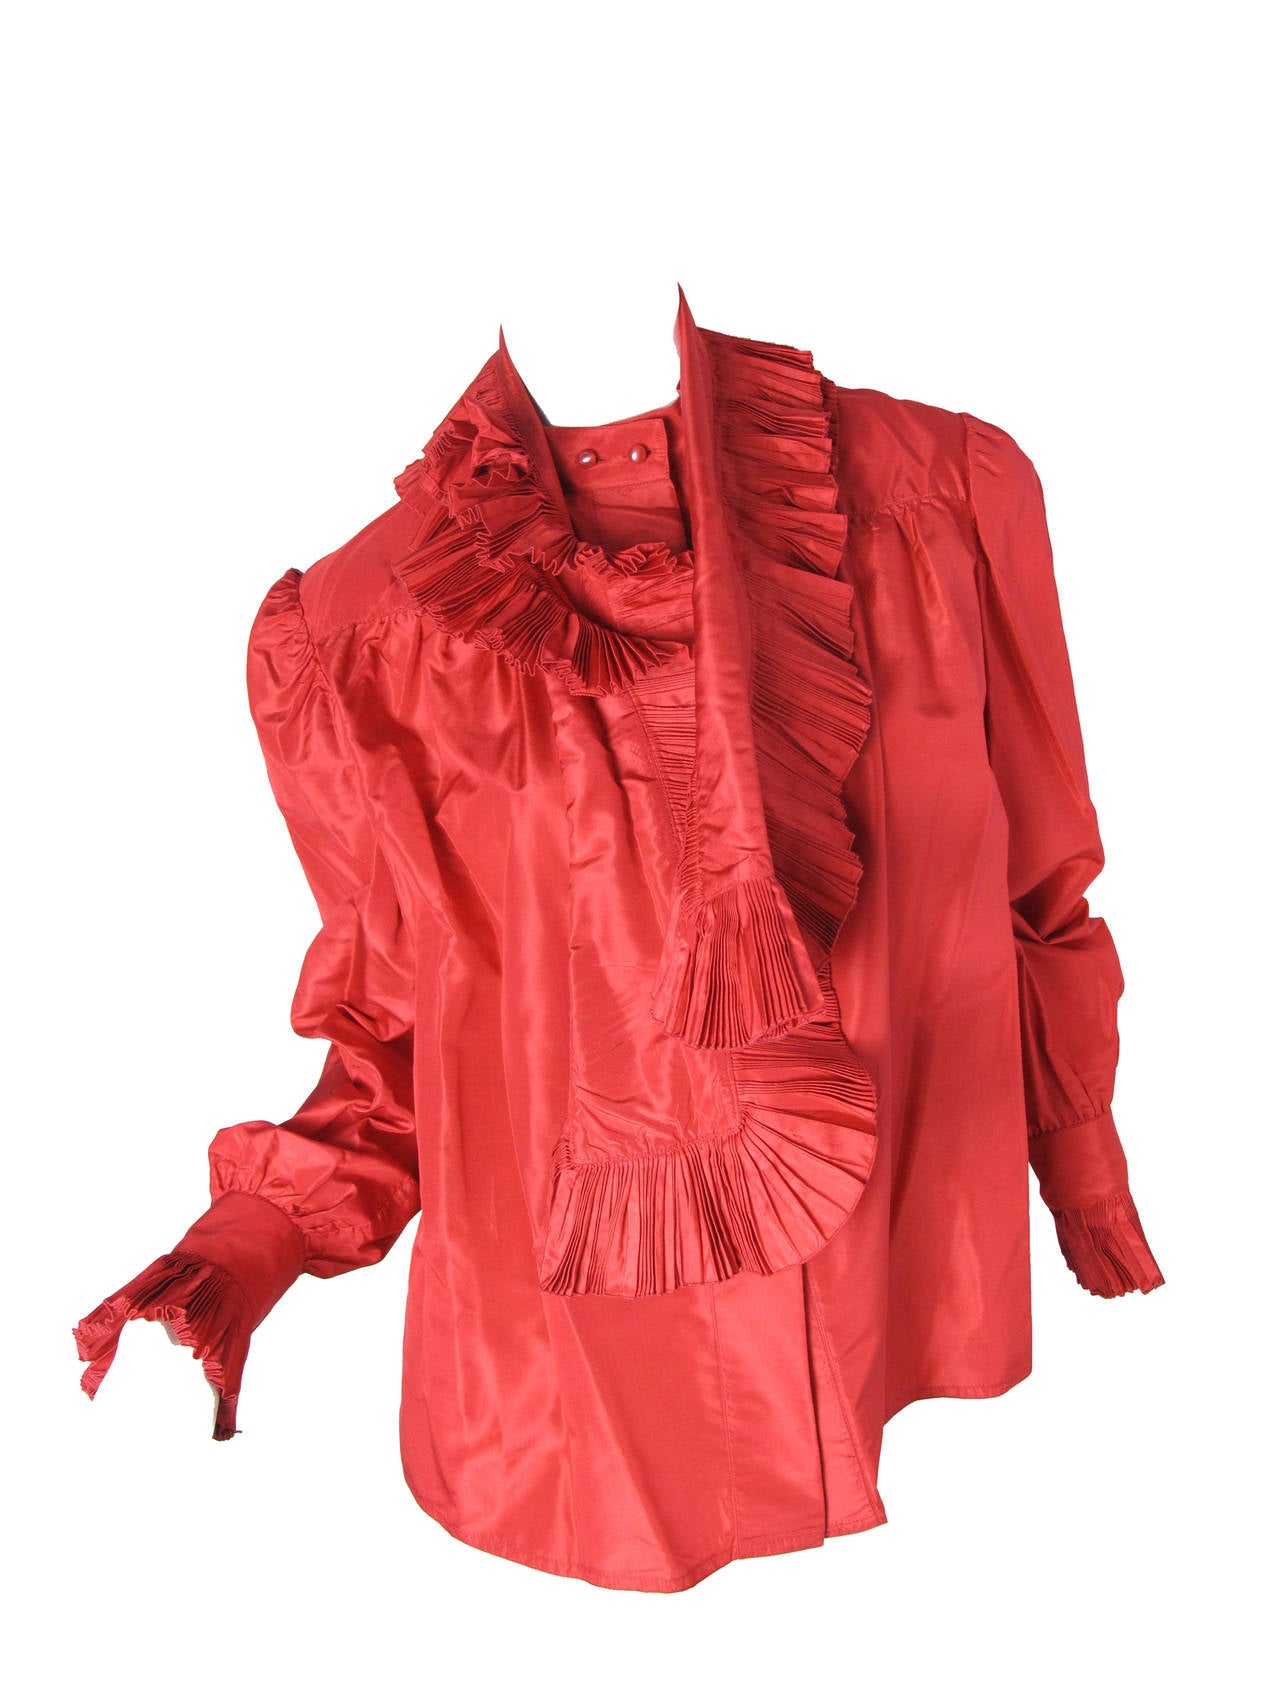 Chloe red silk blouse with ruffled cuffs and collar.  42